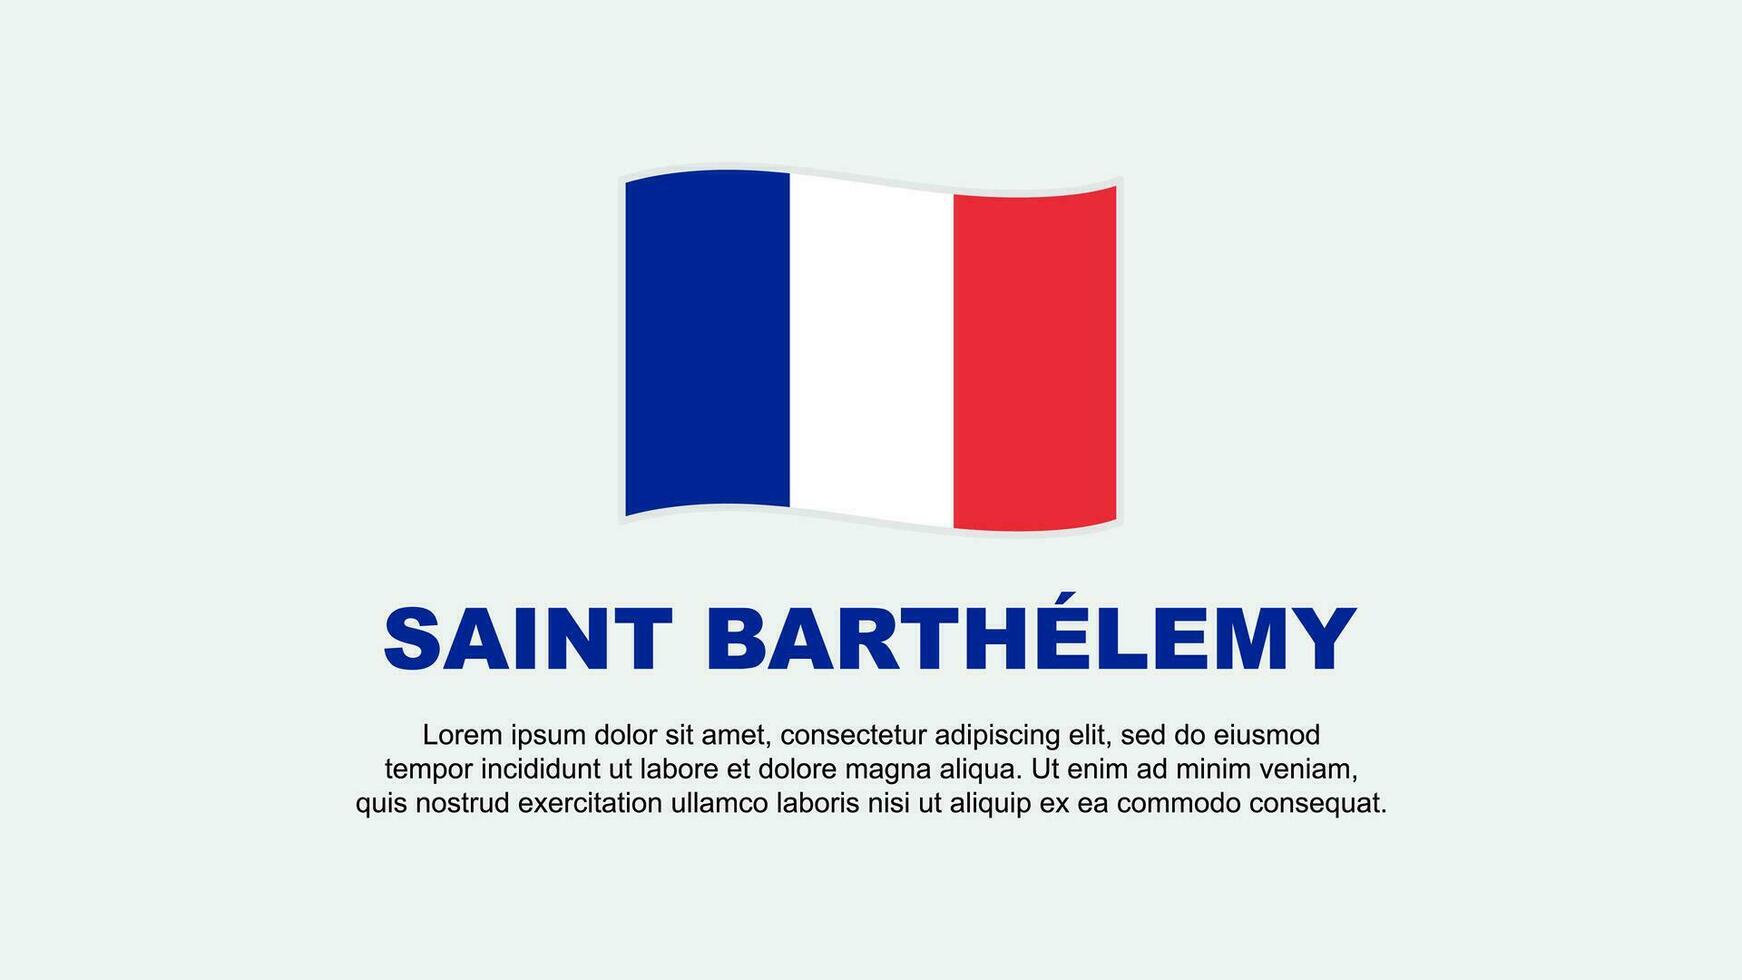 Saint Barthelemy Flag Abstract Background Design Template. Saint Barthelemy Independence Day Banner Social Media Vector Illustration. Background